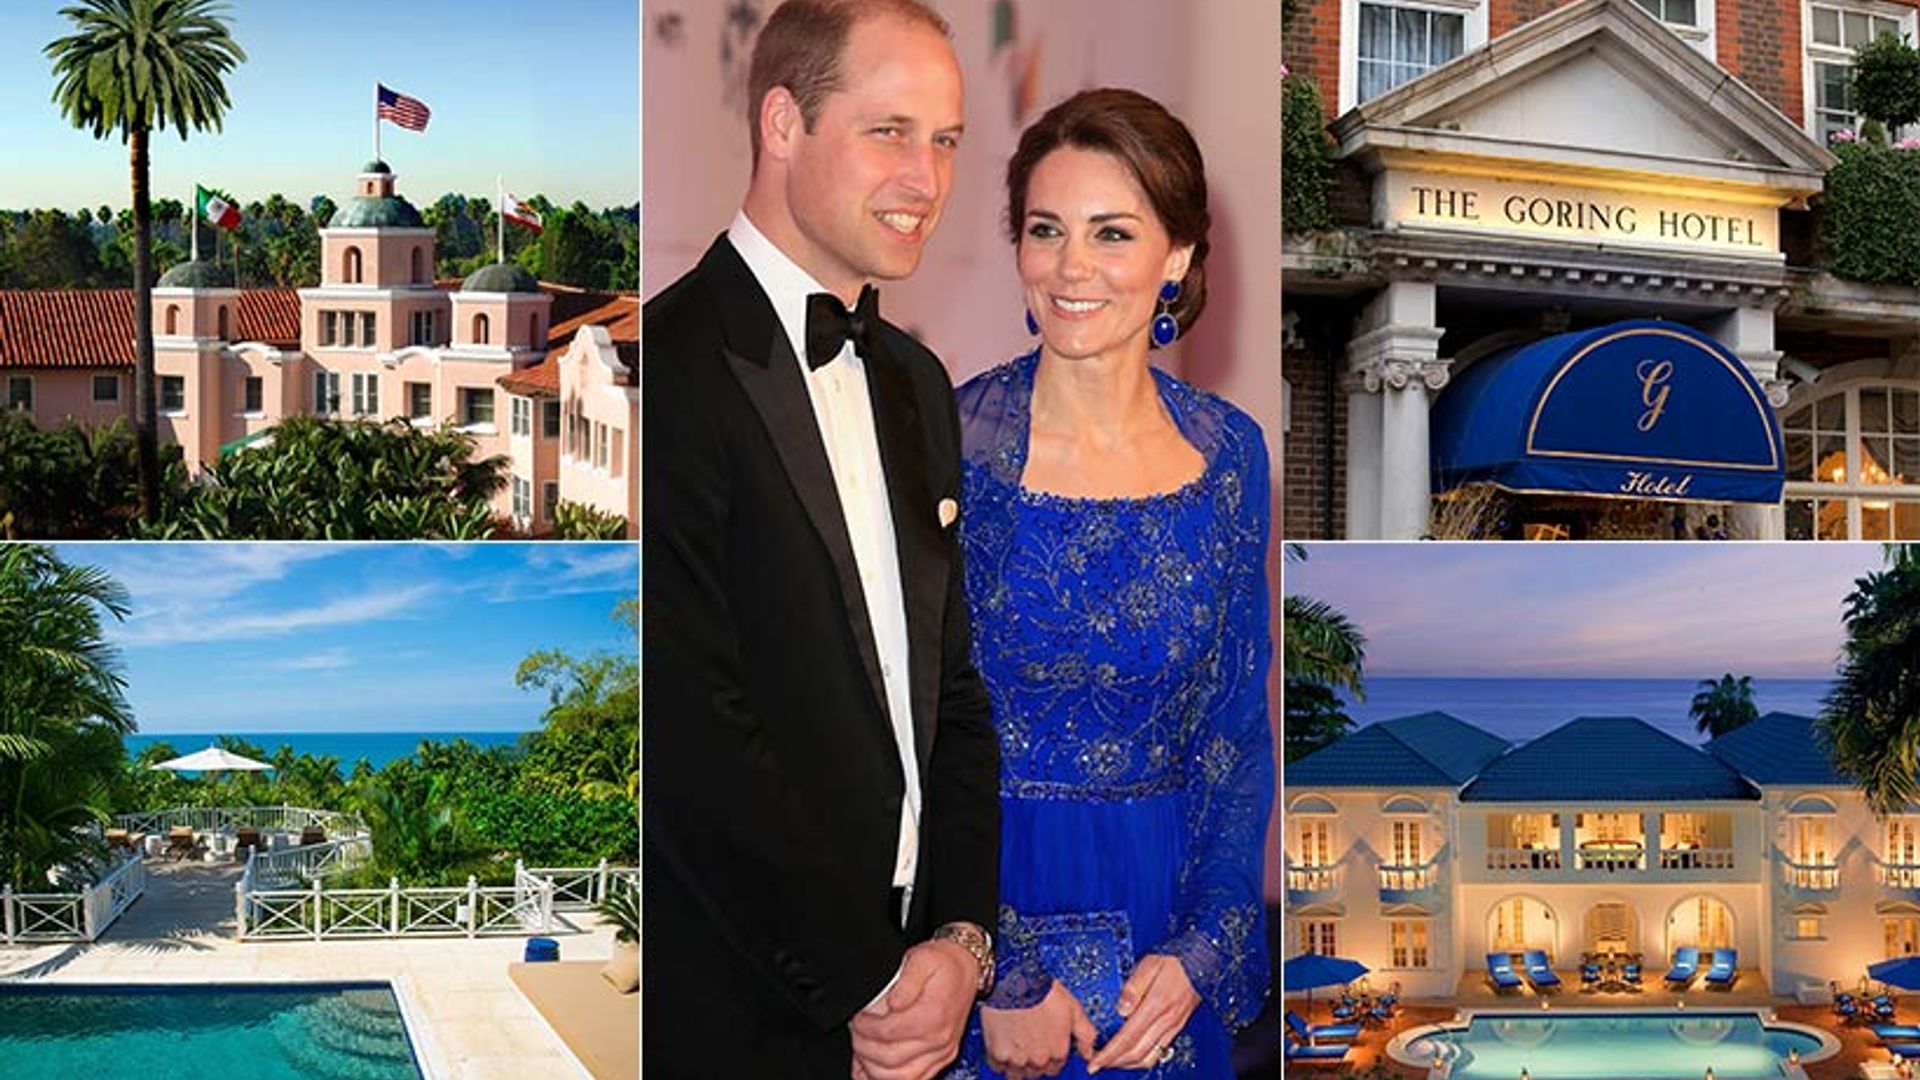 Holiday like royalty in the hotels loved by William, Kate and the Queen